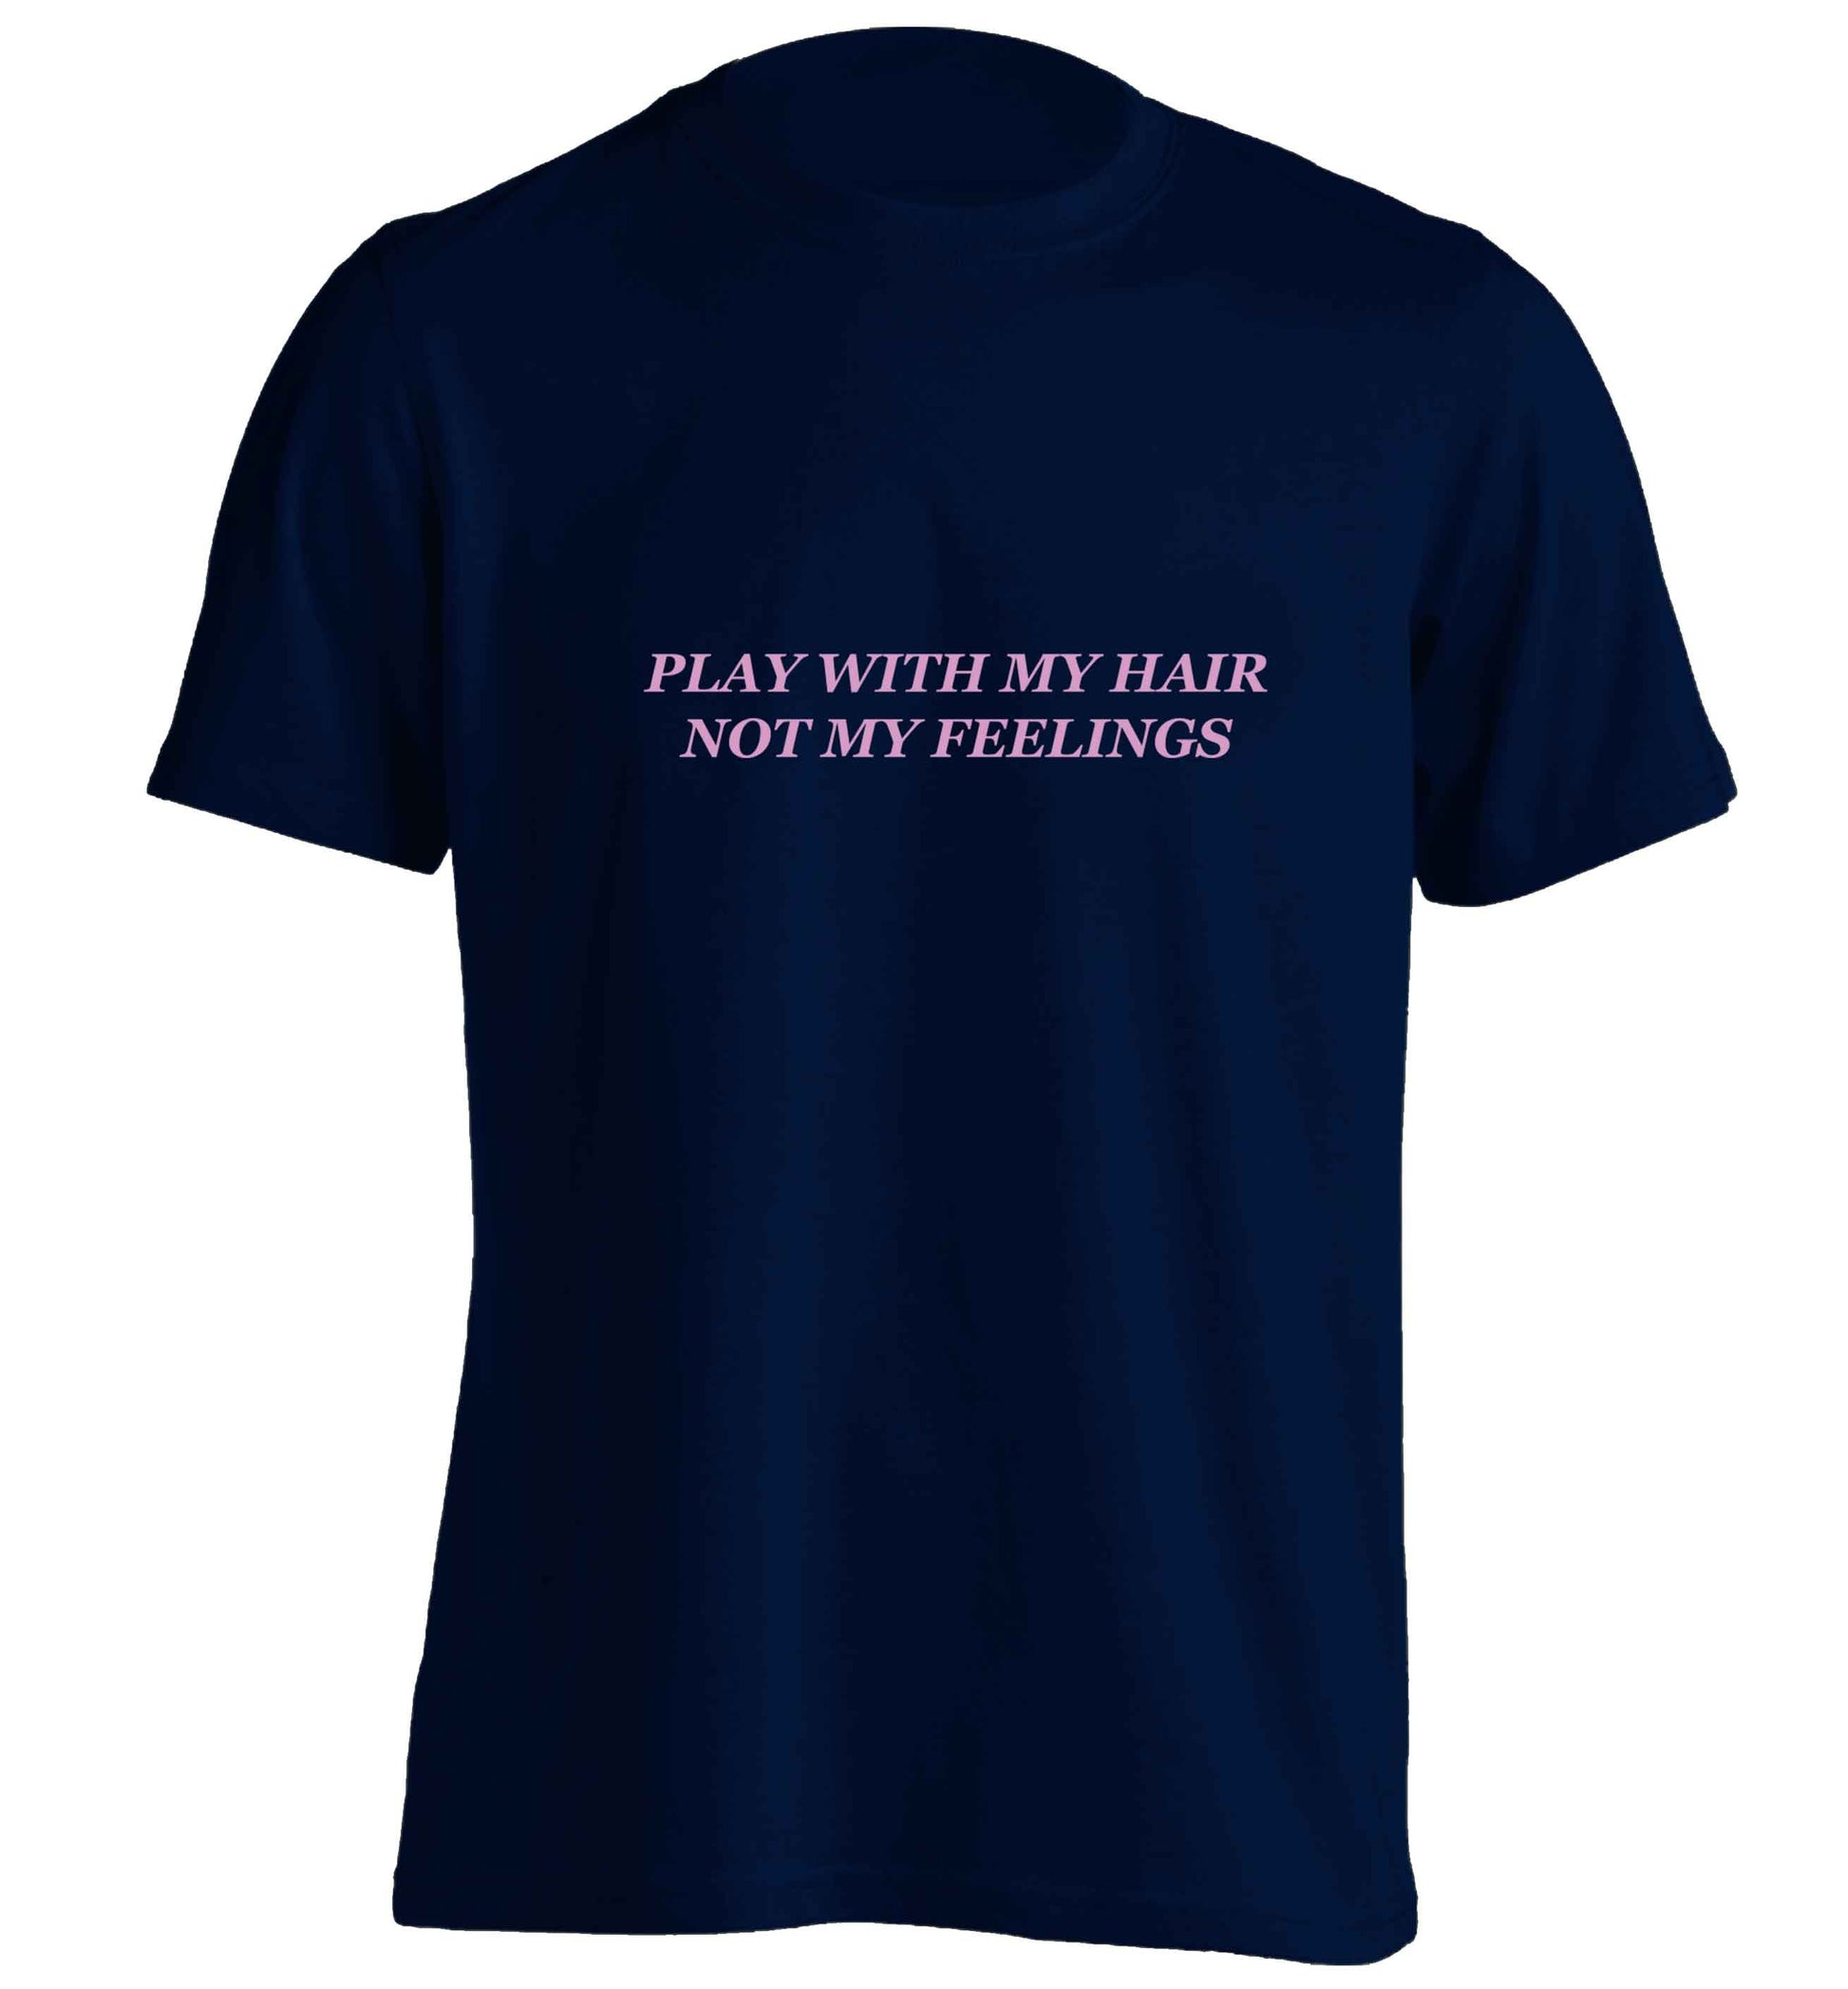 Play with my hair not my feelings adults unisex navy Tshirt 2XL